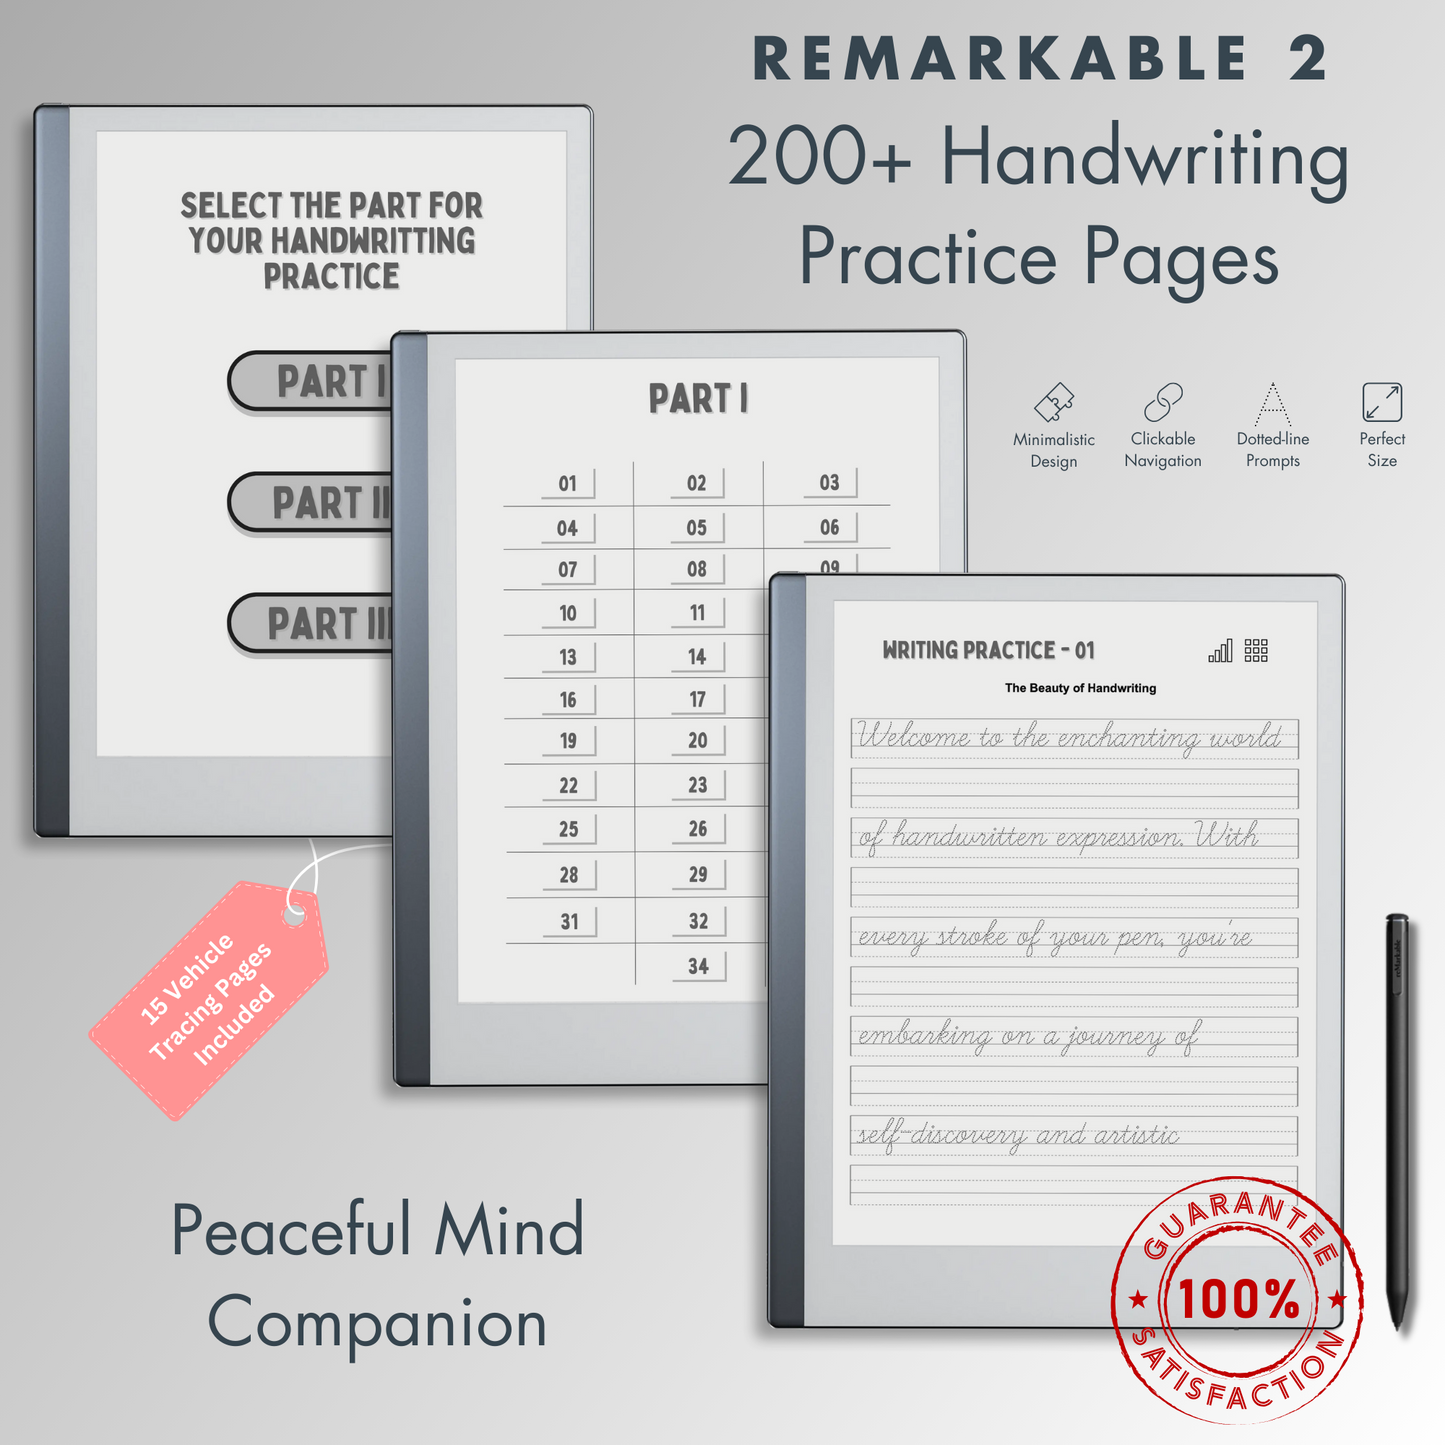 Handwriting Templates for Remarkable 2.